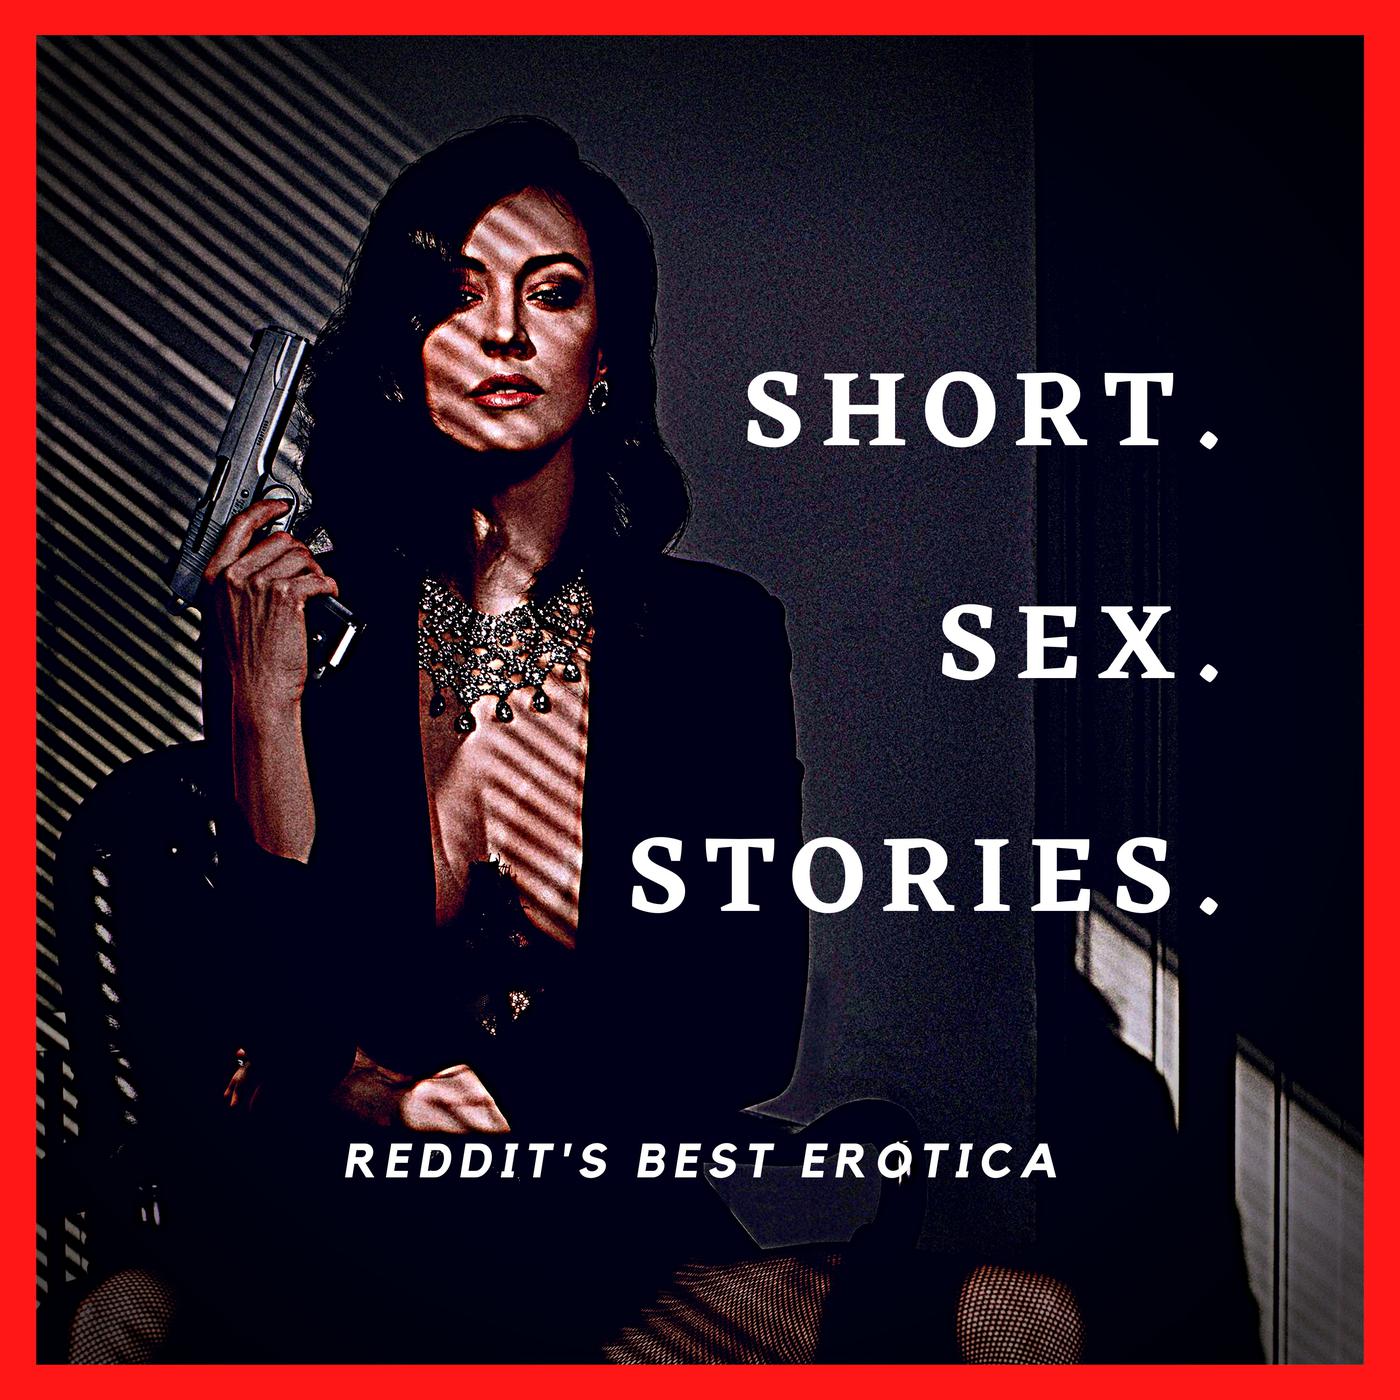 ahmed bitar recommends Man Girl Sex Stories